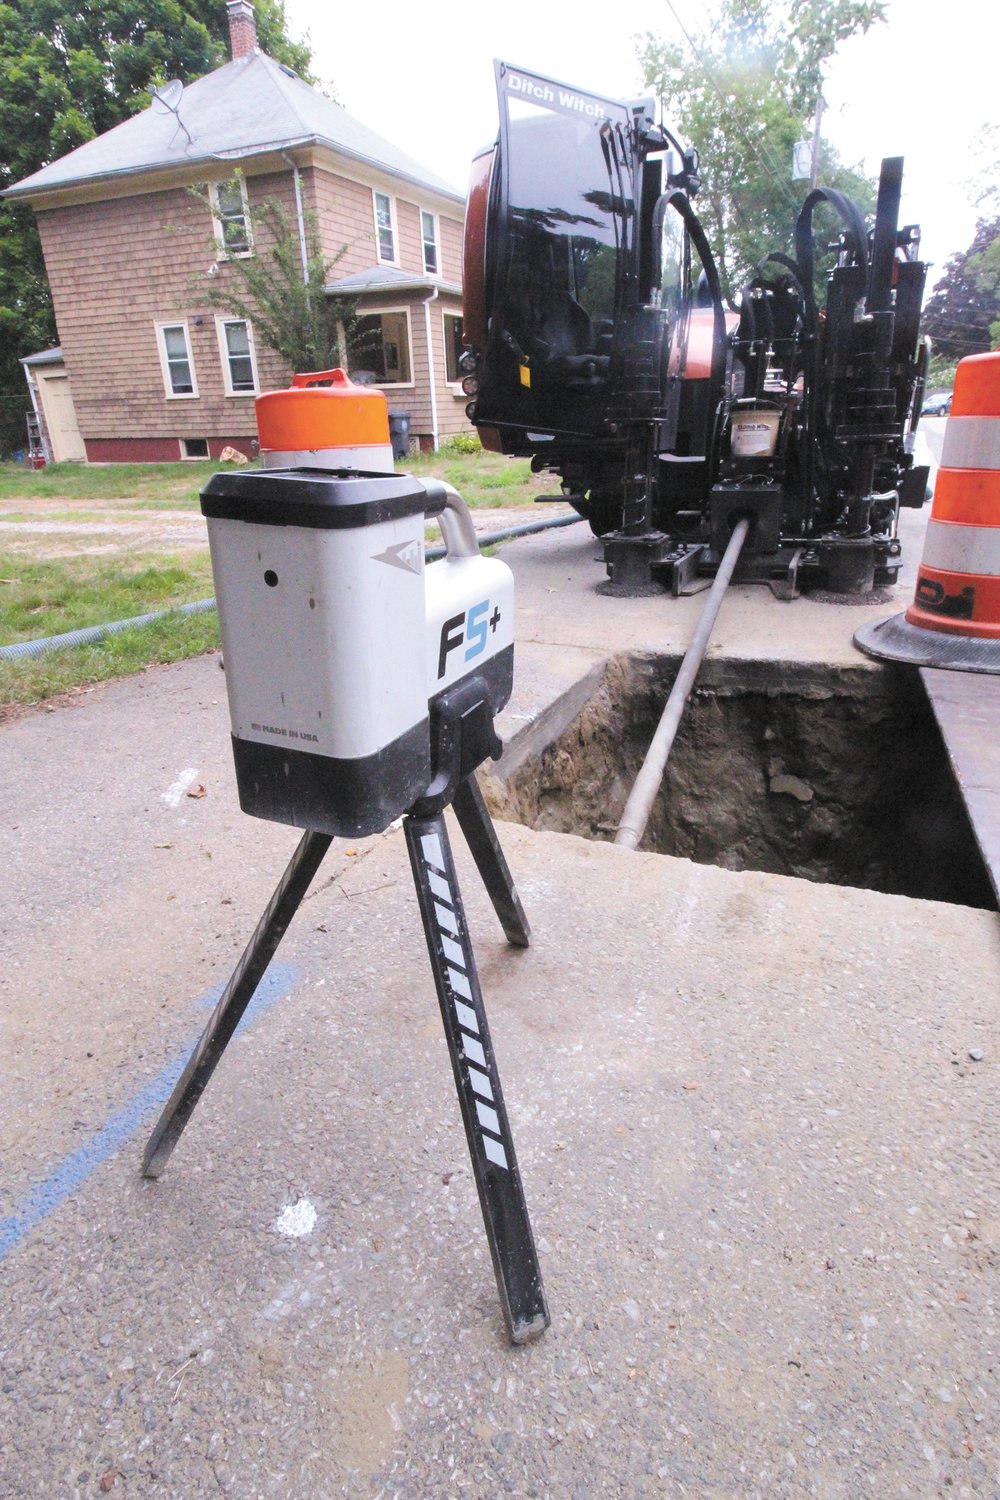 KEEPING TRACK: Using telemetry from the head of the drill and a transmitter positioned over white dots to indicated the desired path of the subsurface line, the operator is able to tell whether the boring on line and make adjustments as they go. On an average 300 feet of pipe is installed a day.